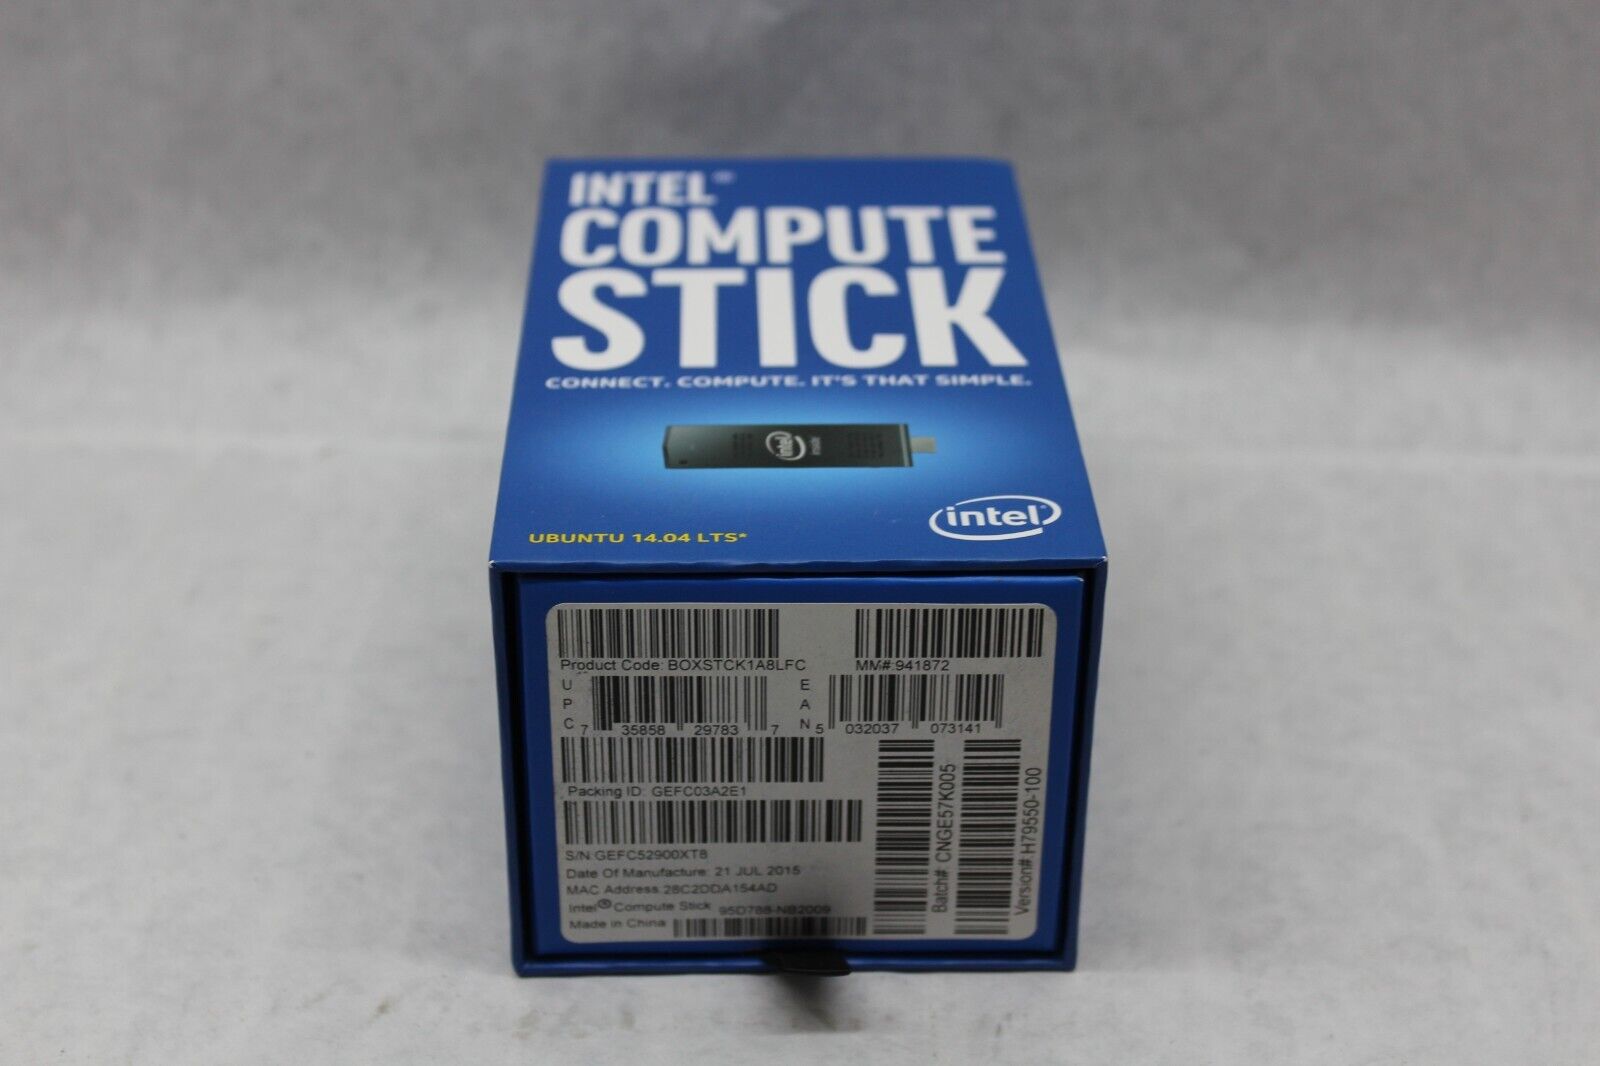 Intel STCK1A8LFC 8GB PC Compute Stick with Linux